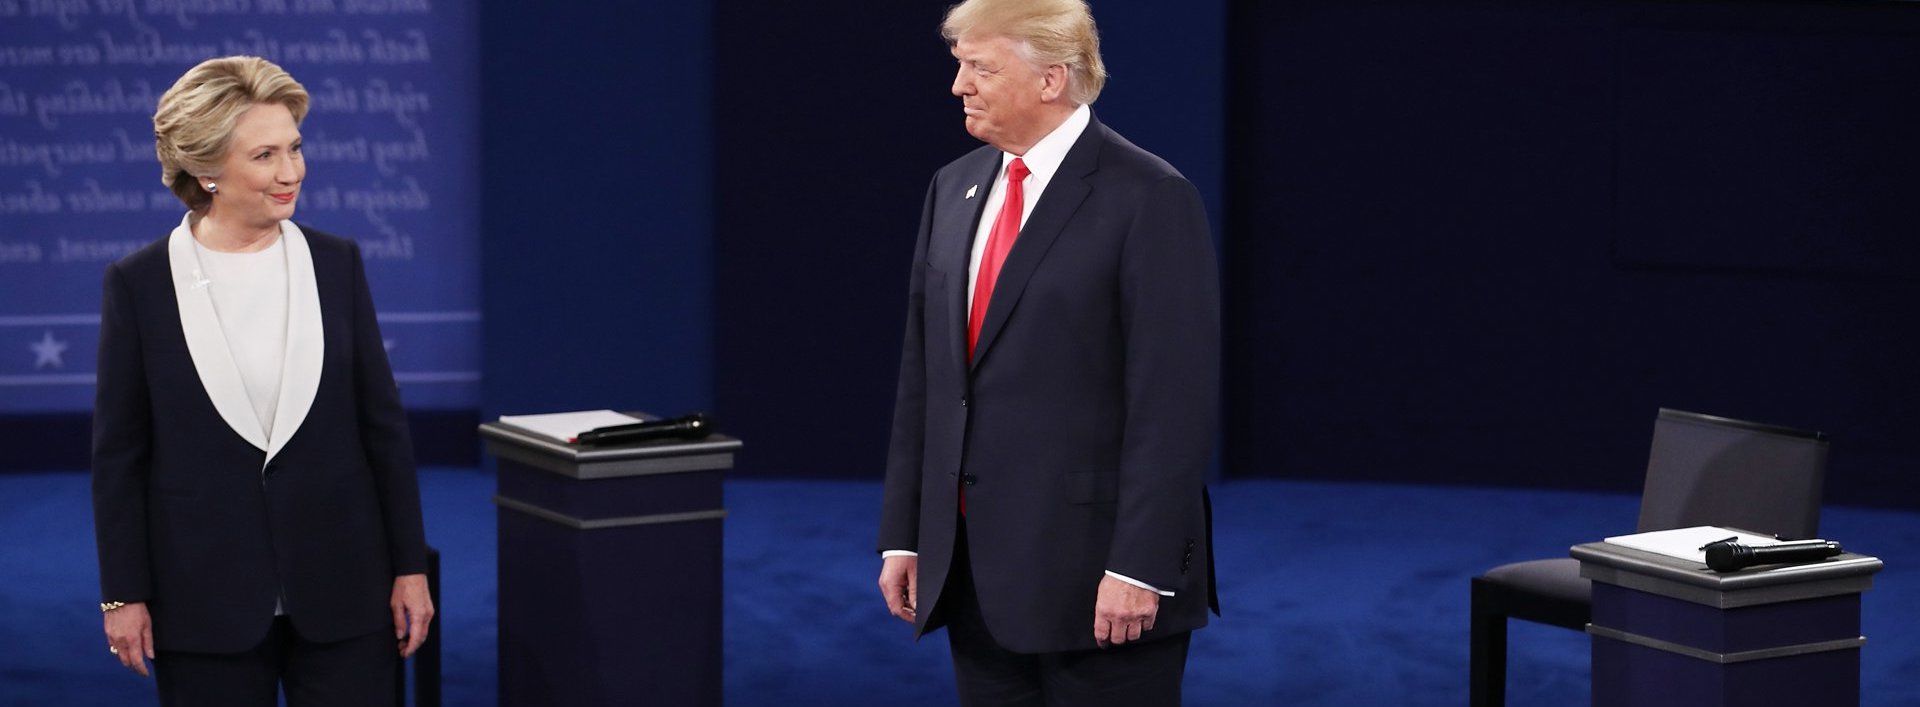 Hillary Clinton and Donald Trump: The First Debate